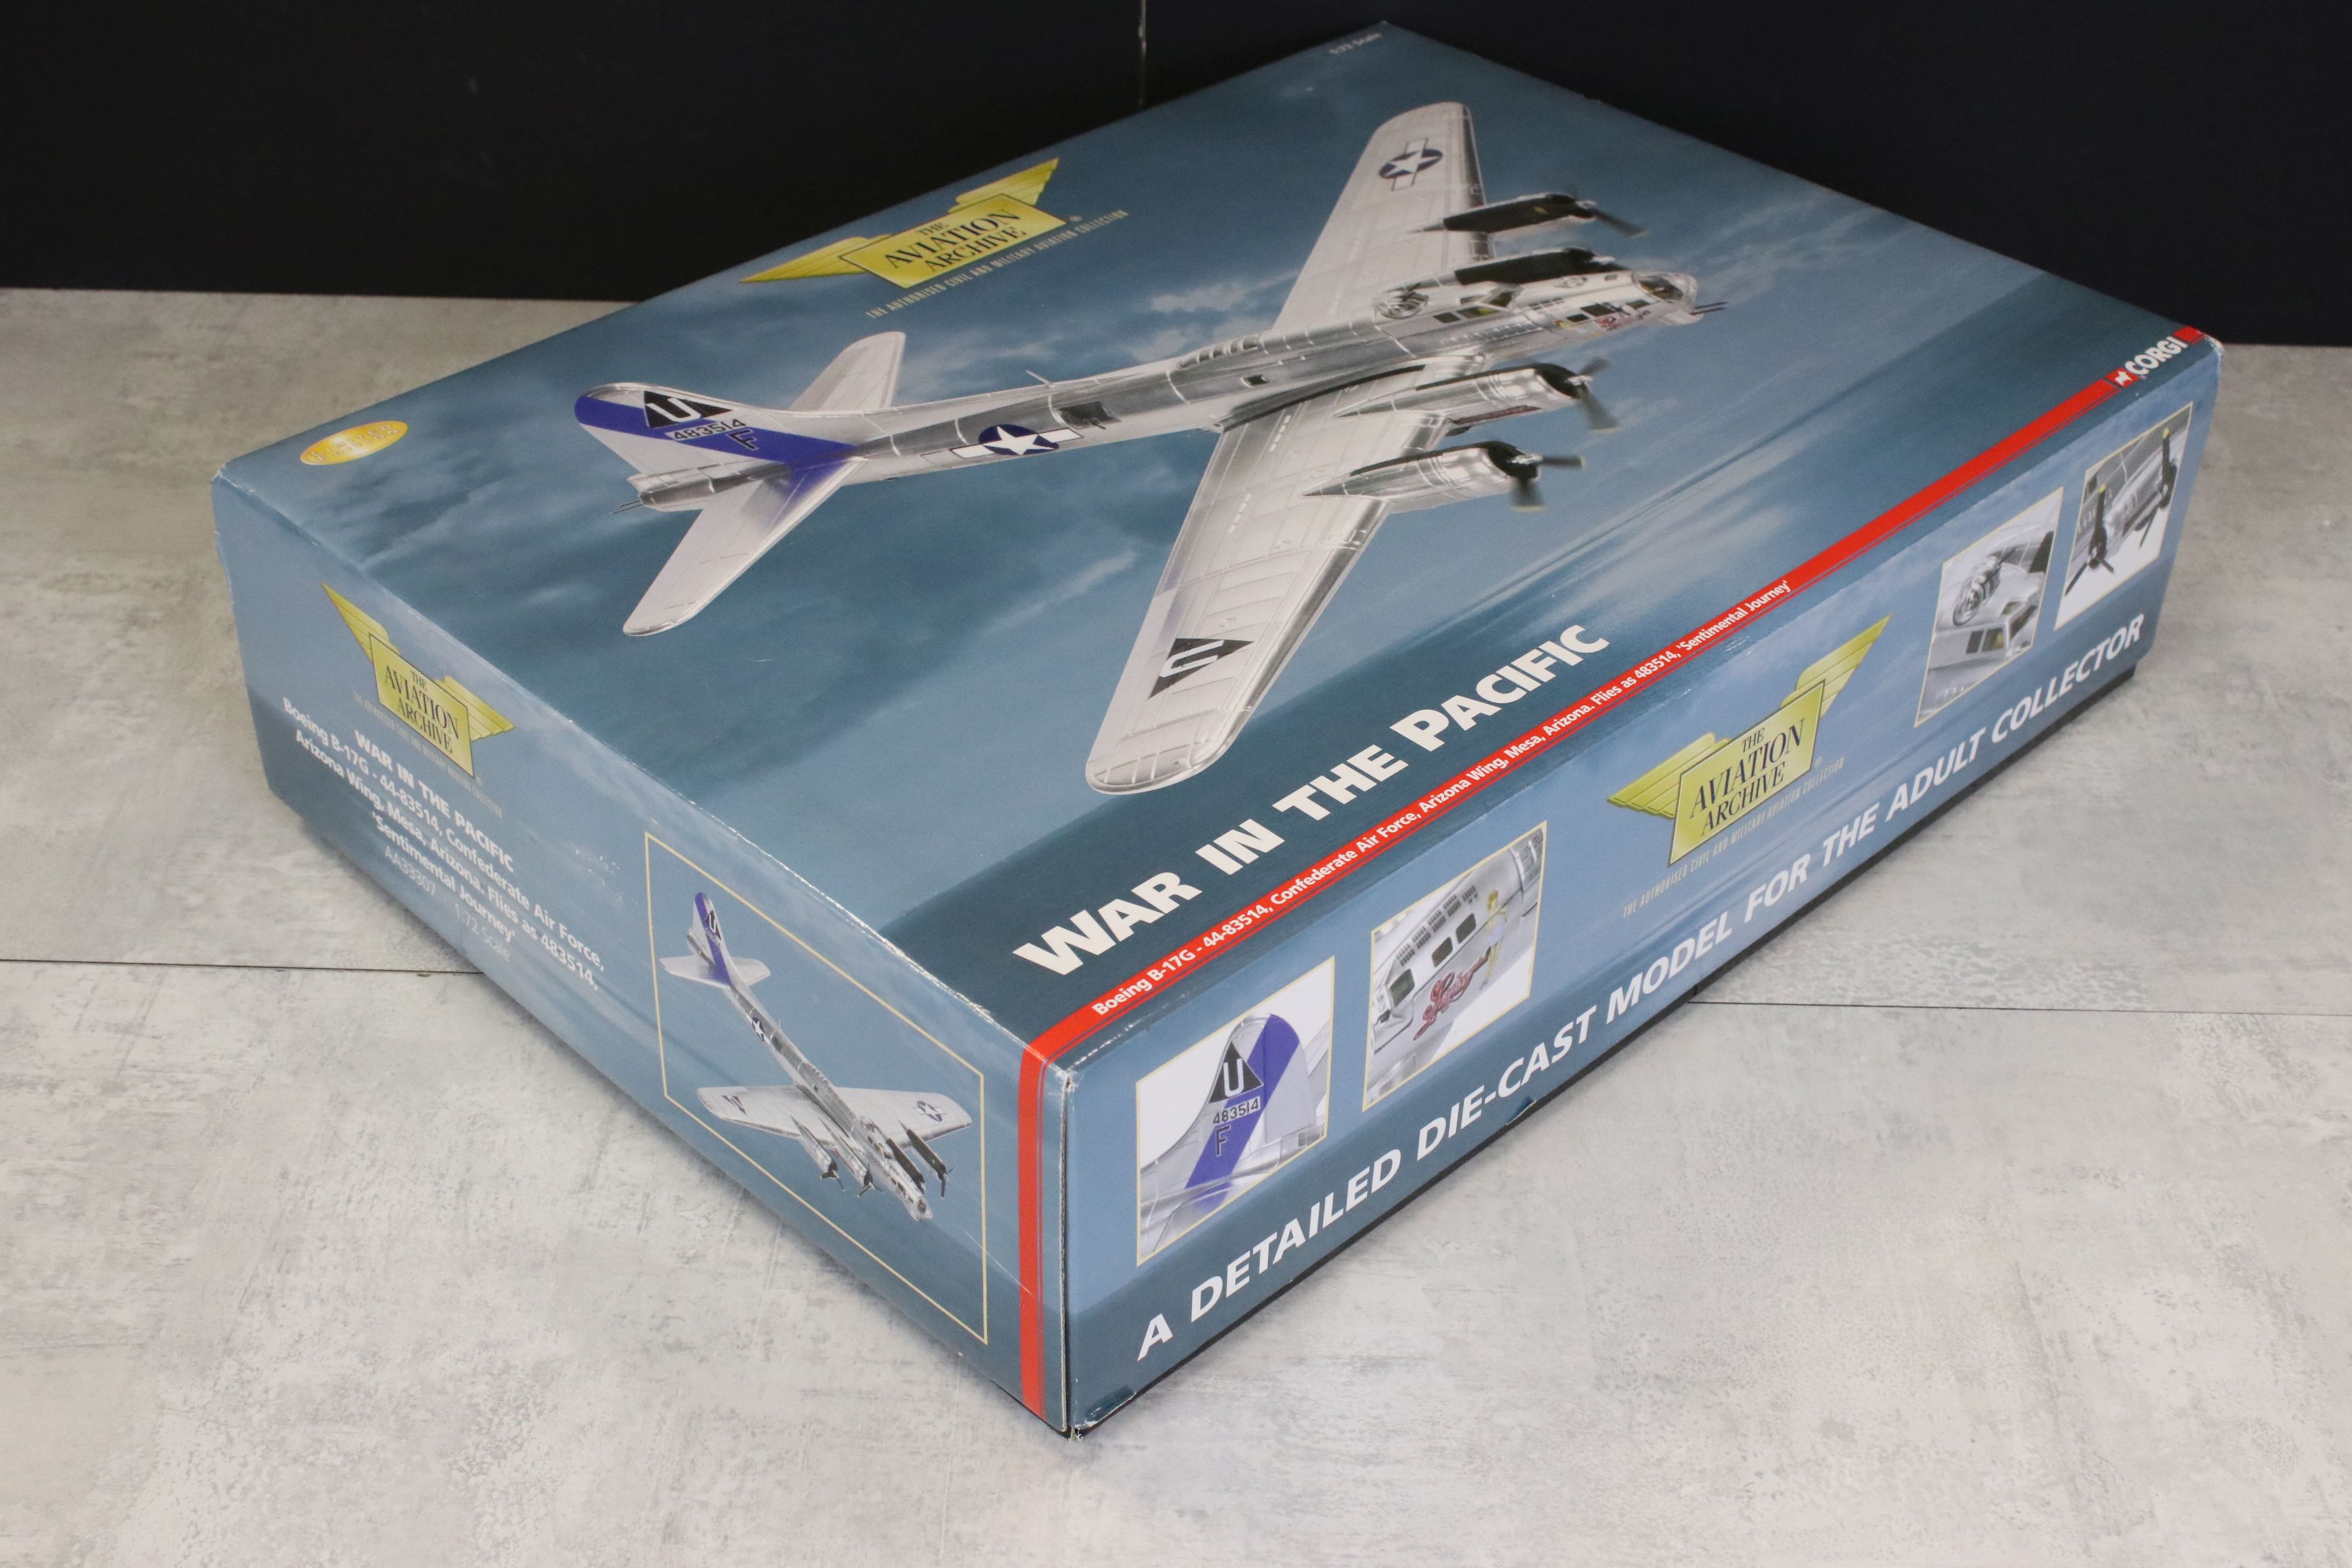 Two Boxed Corgi Aviation Archive 1/72 ltd edn military aircraft diecast models with certificates - Image 3 of 21